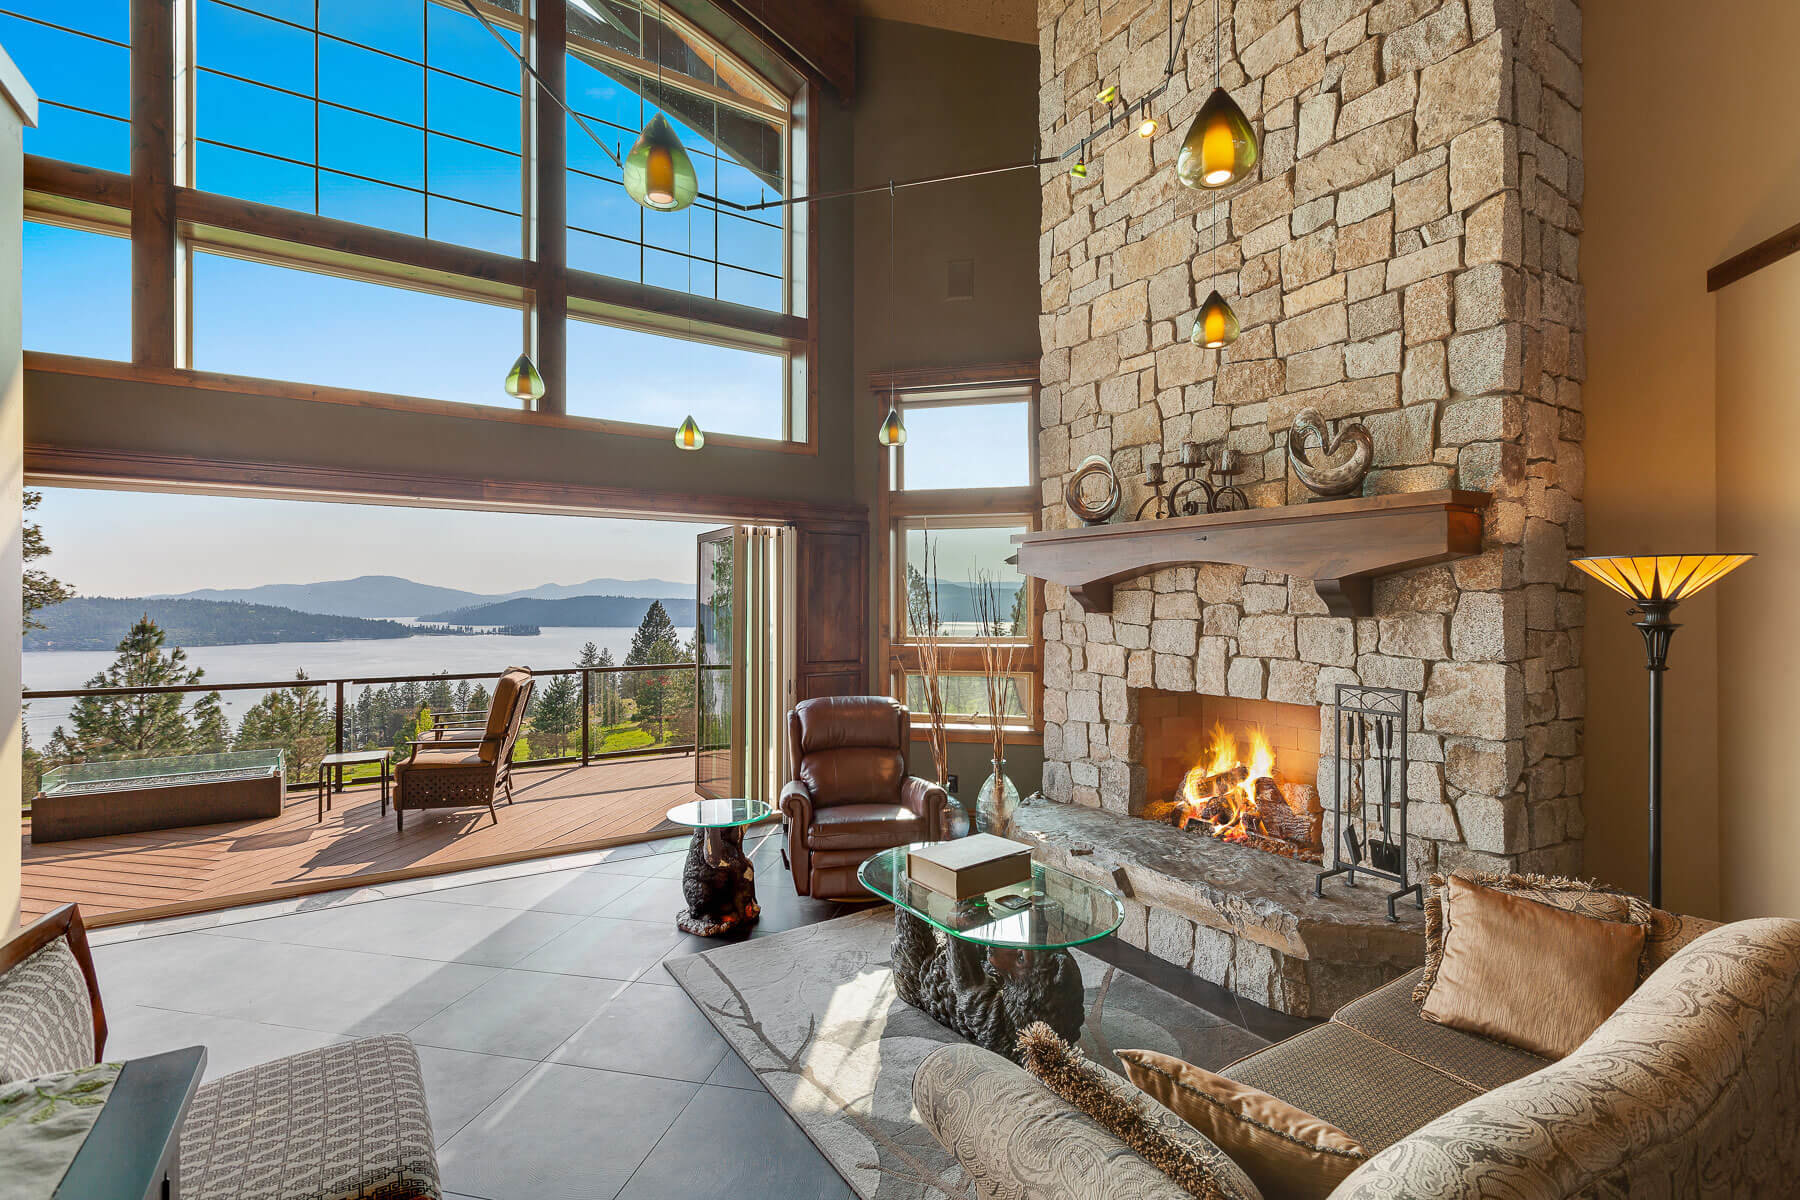 Living room with fireplace and balcony with lake view